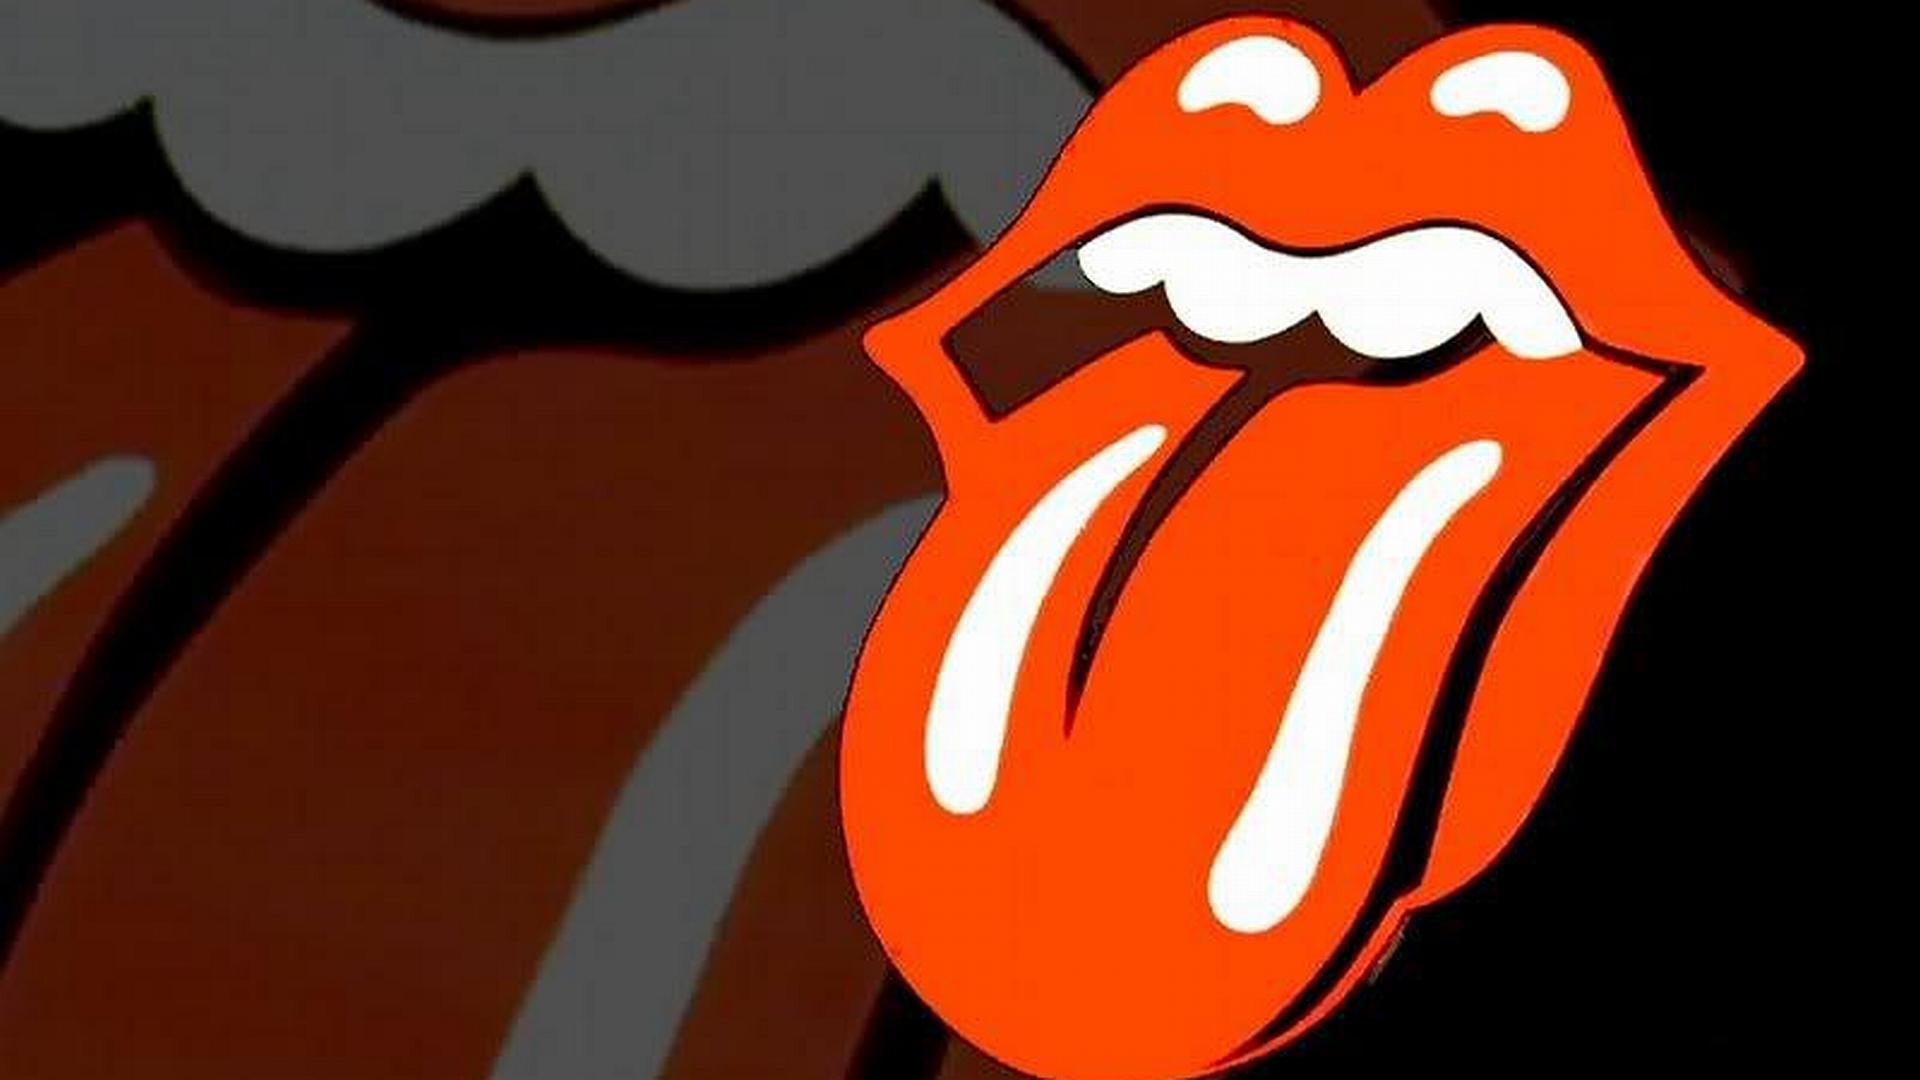 Rolling Stones iPhone Wallpaper , Find HD Wallpaper For Free